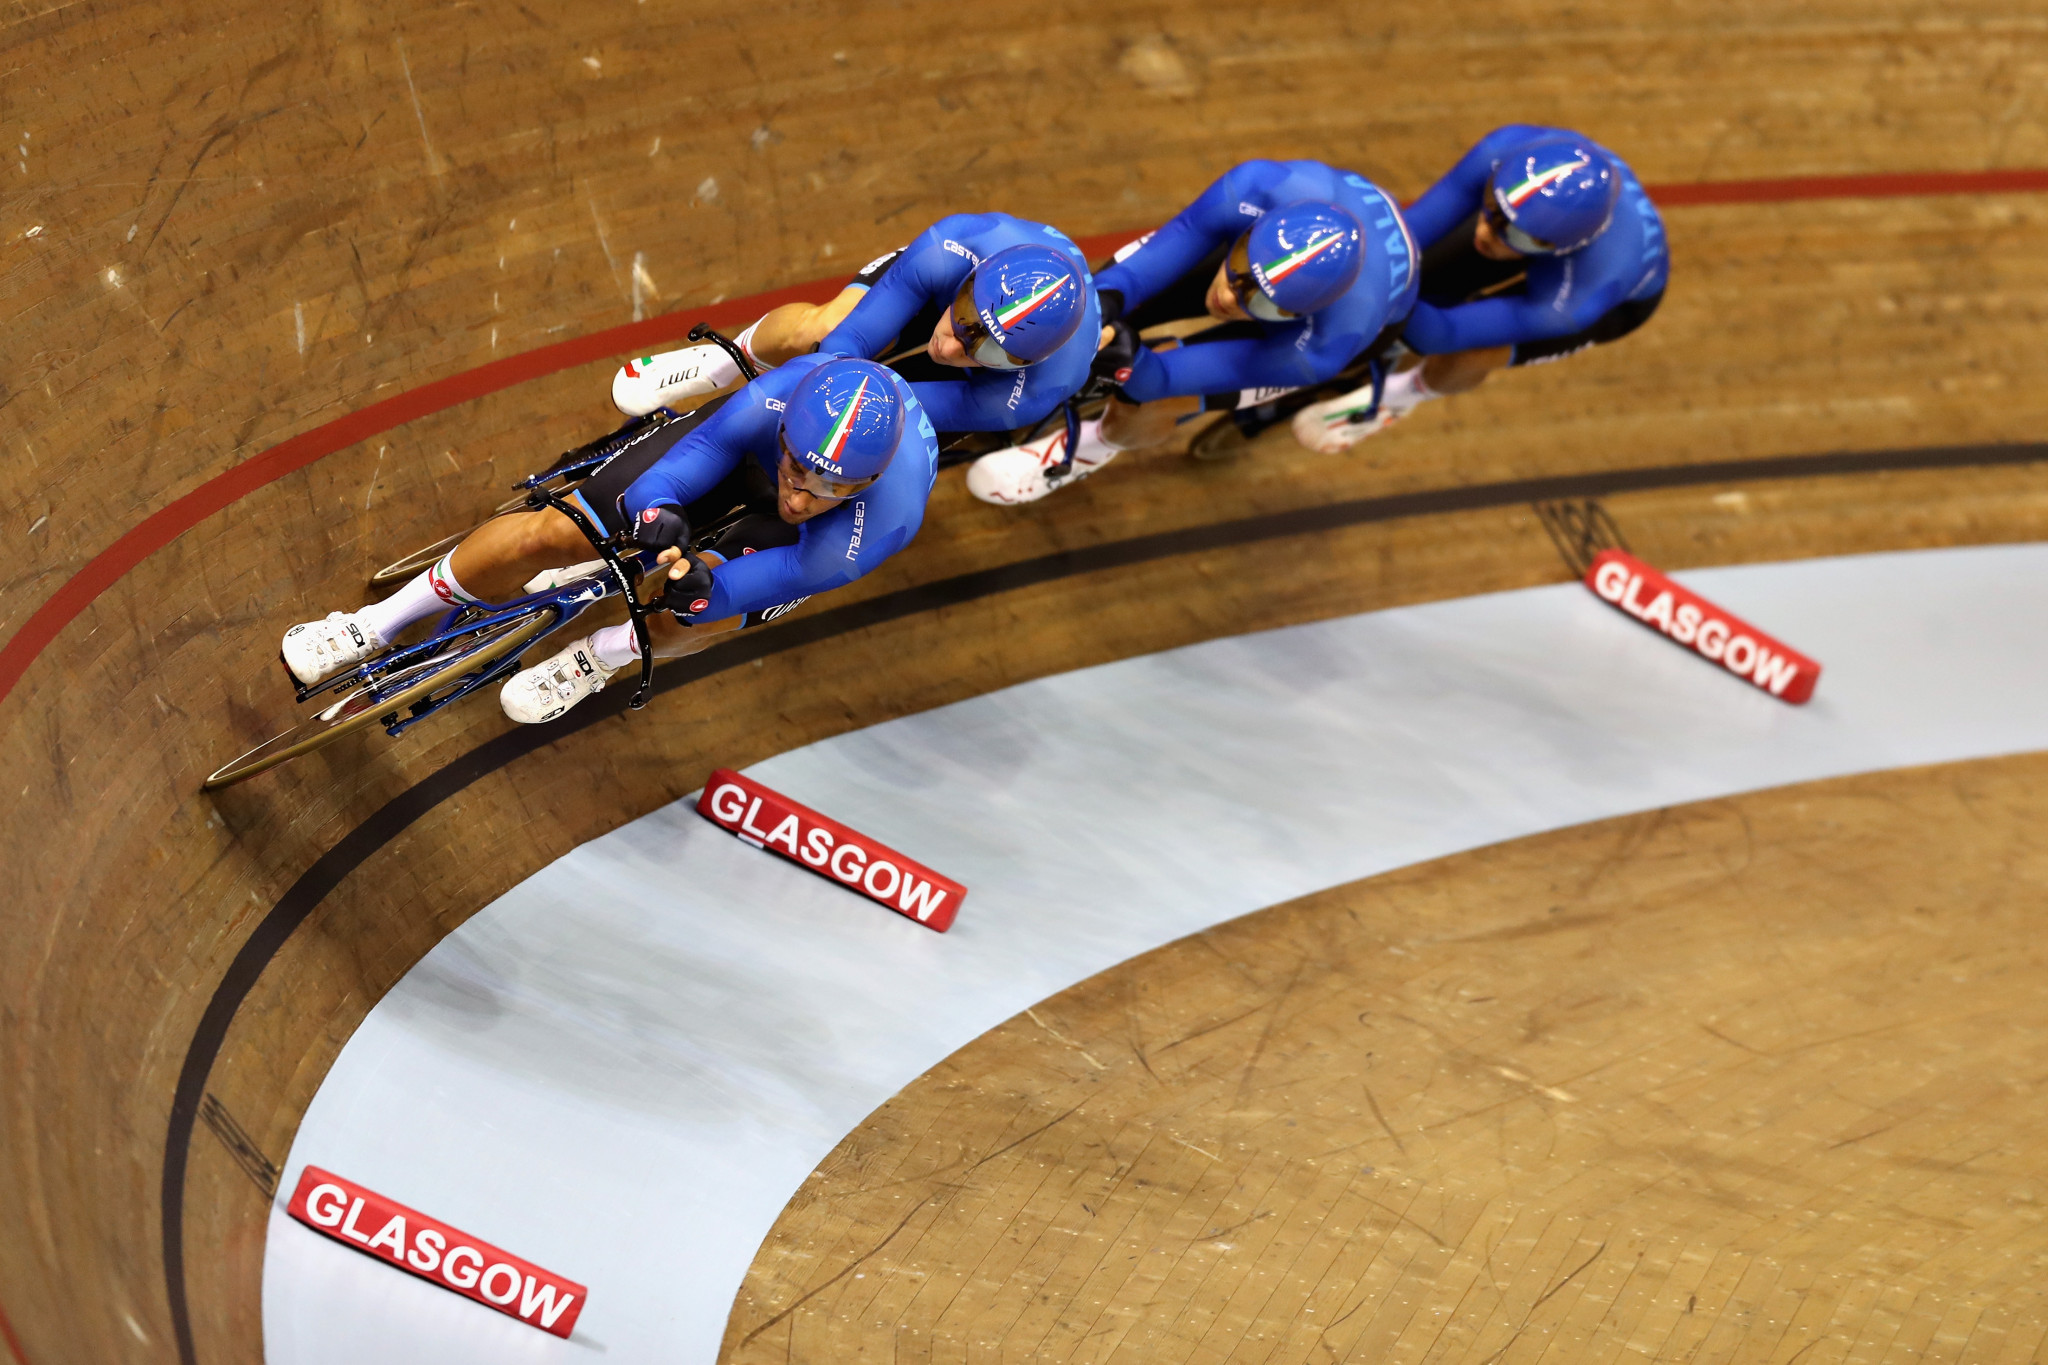 Italy were crowned winners in the men's team pursuit ©Getty Images